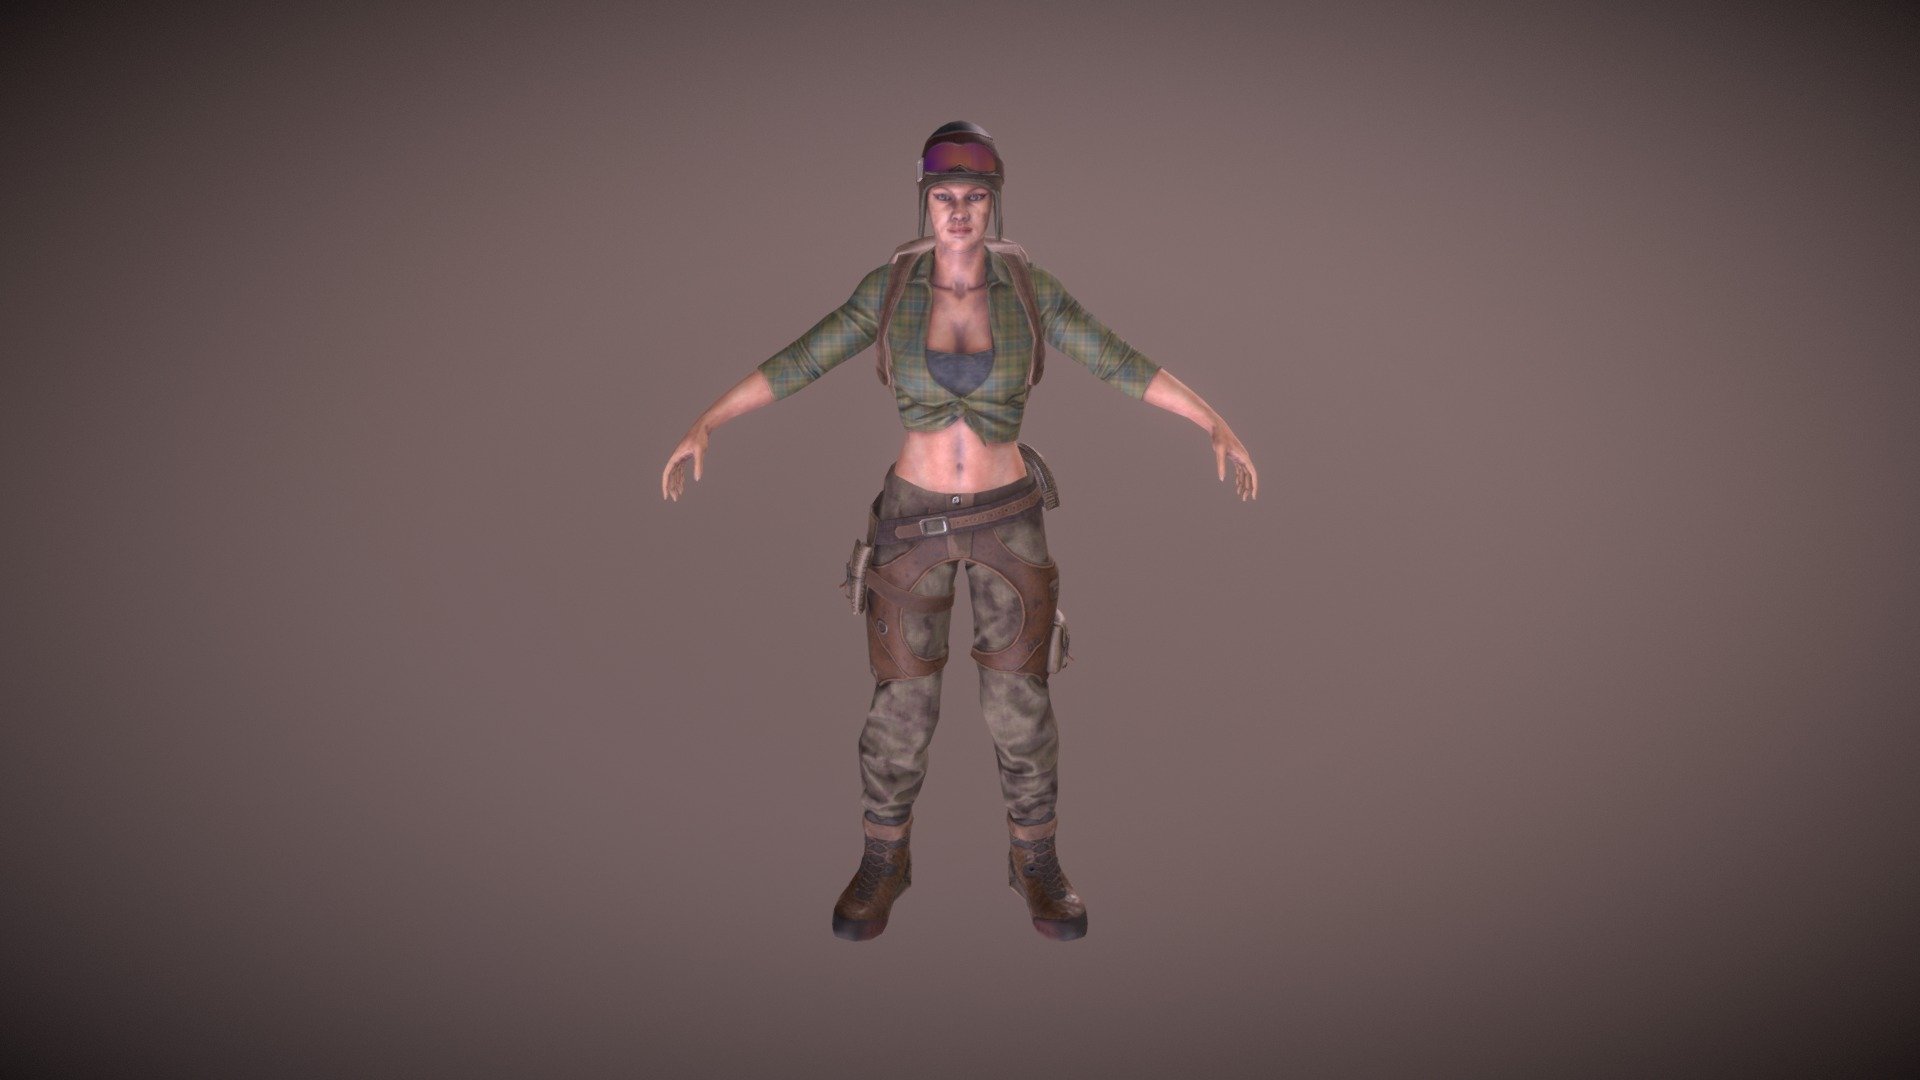 Package includes a Tpose Rigged Humanoid Character in FBX format, standard PBR textures, Unity PBR textures as well as Unreal PBR textures in 2k resolution. character is separated into 4 parts: backpack, head, clothes and pants. whole body is about 9k triangles, Backpack is 1.6k triangles 3d model